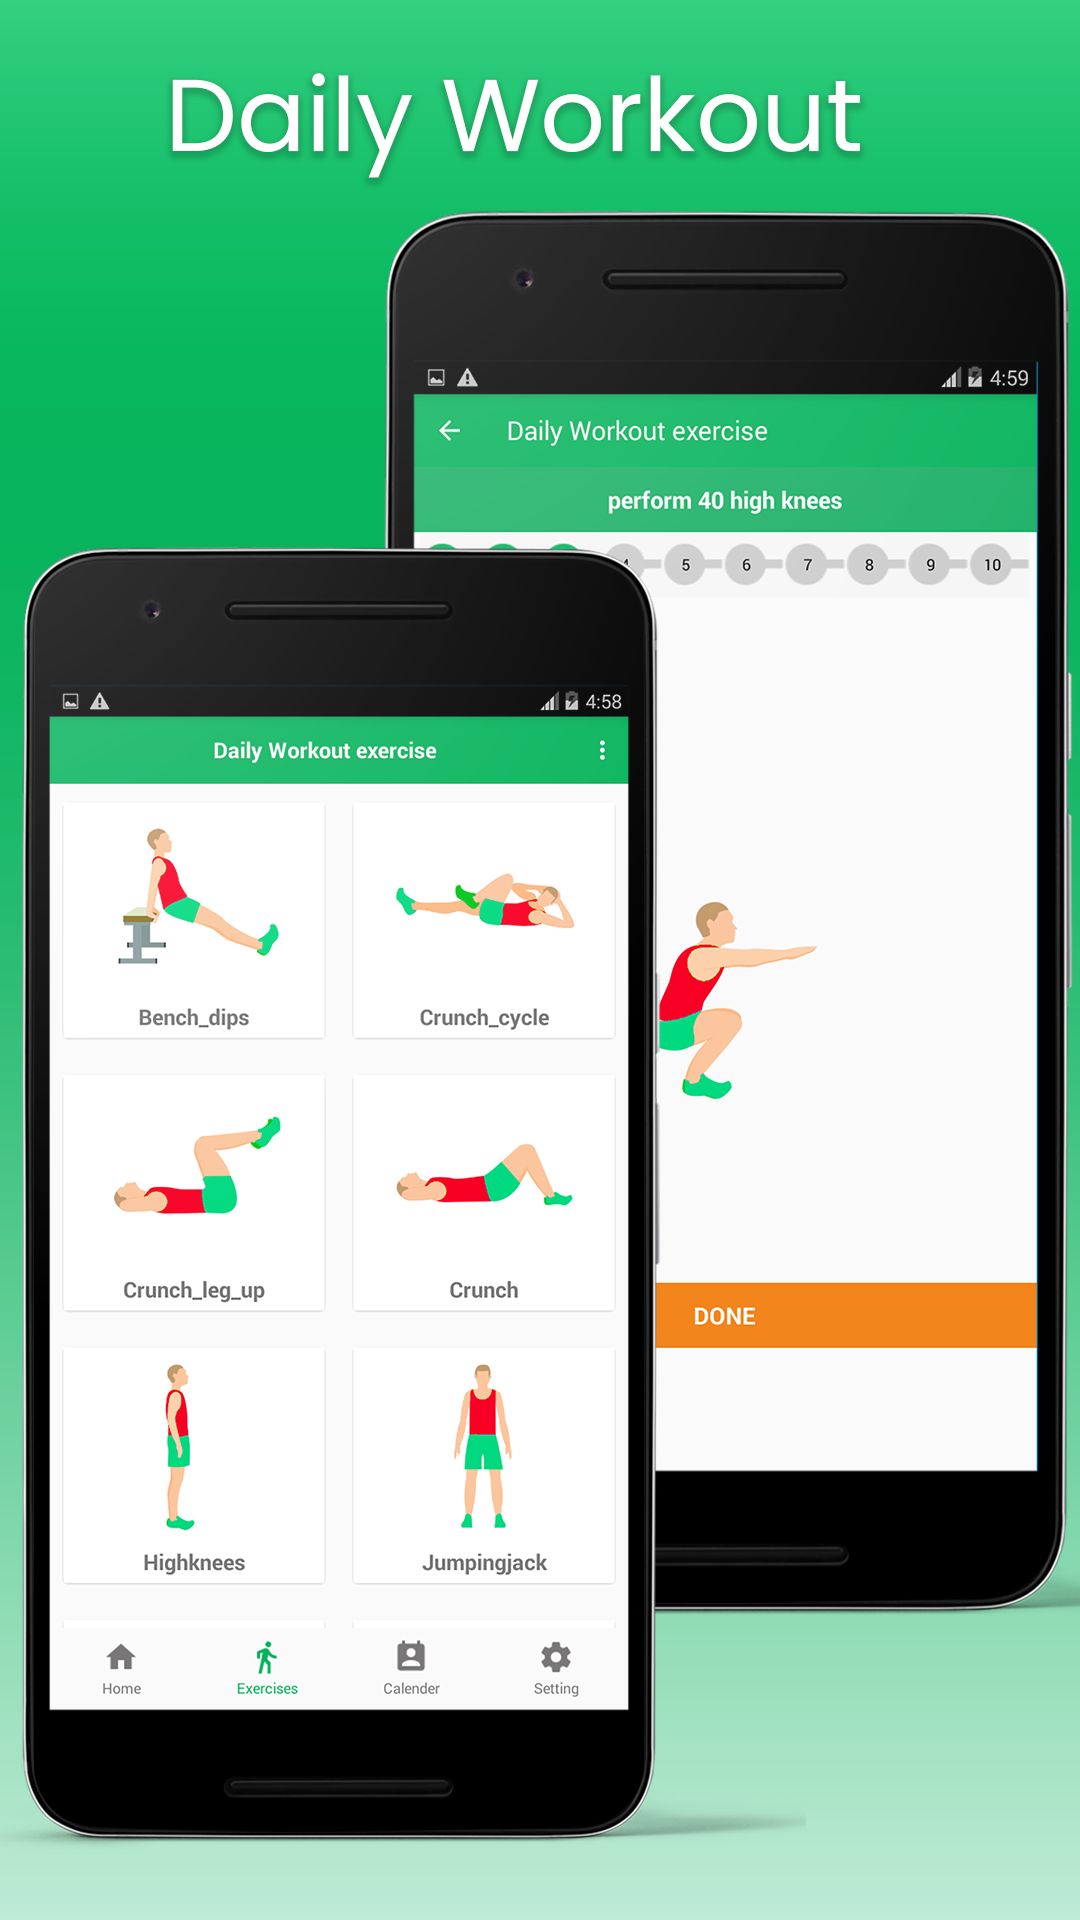 5 Day Arm workout app android for Burn Fat fast